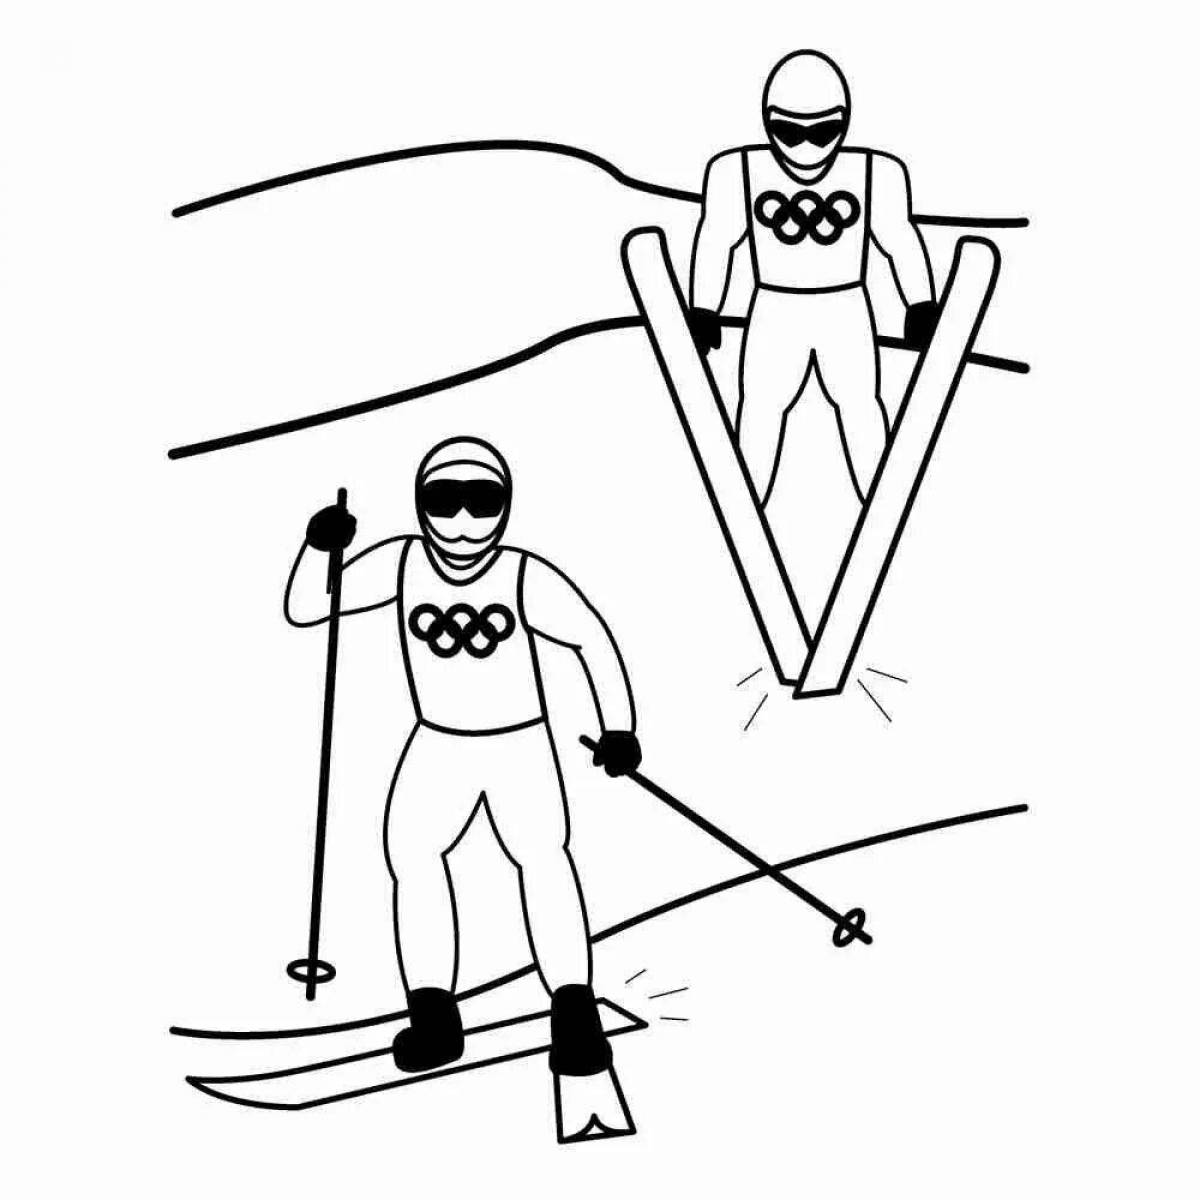 Glowing skier coloring page